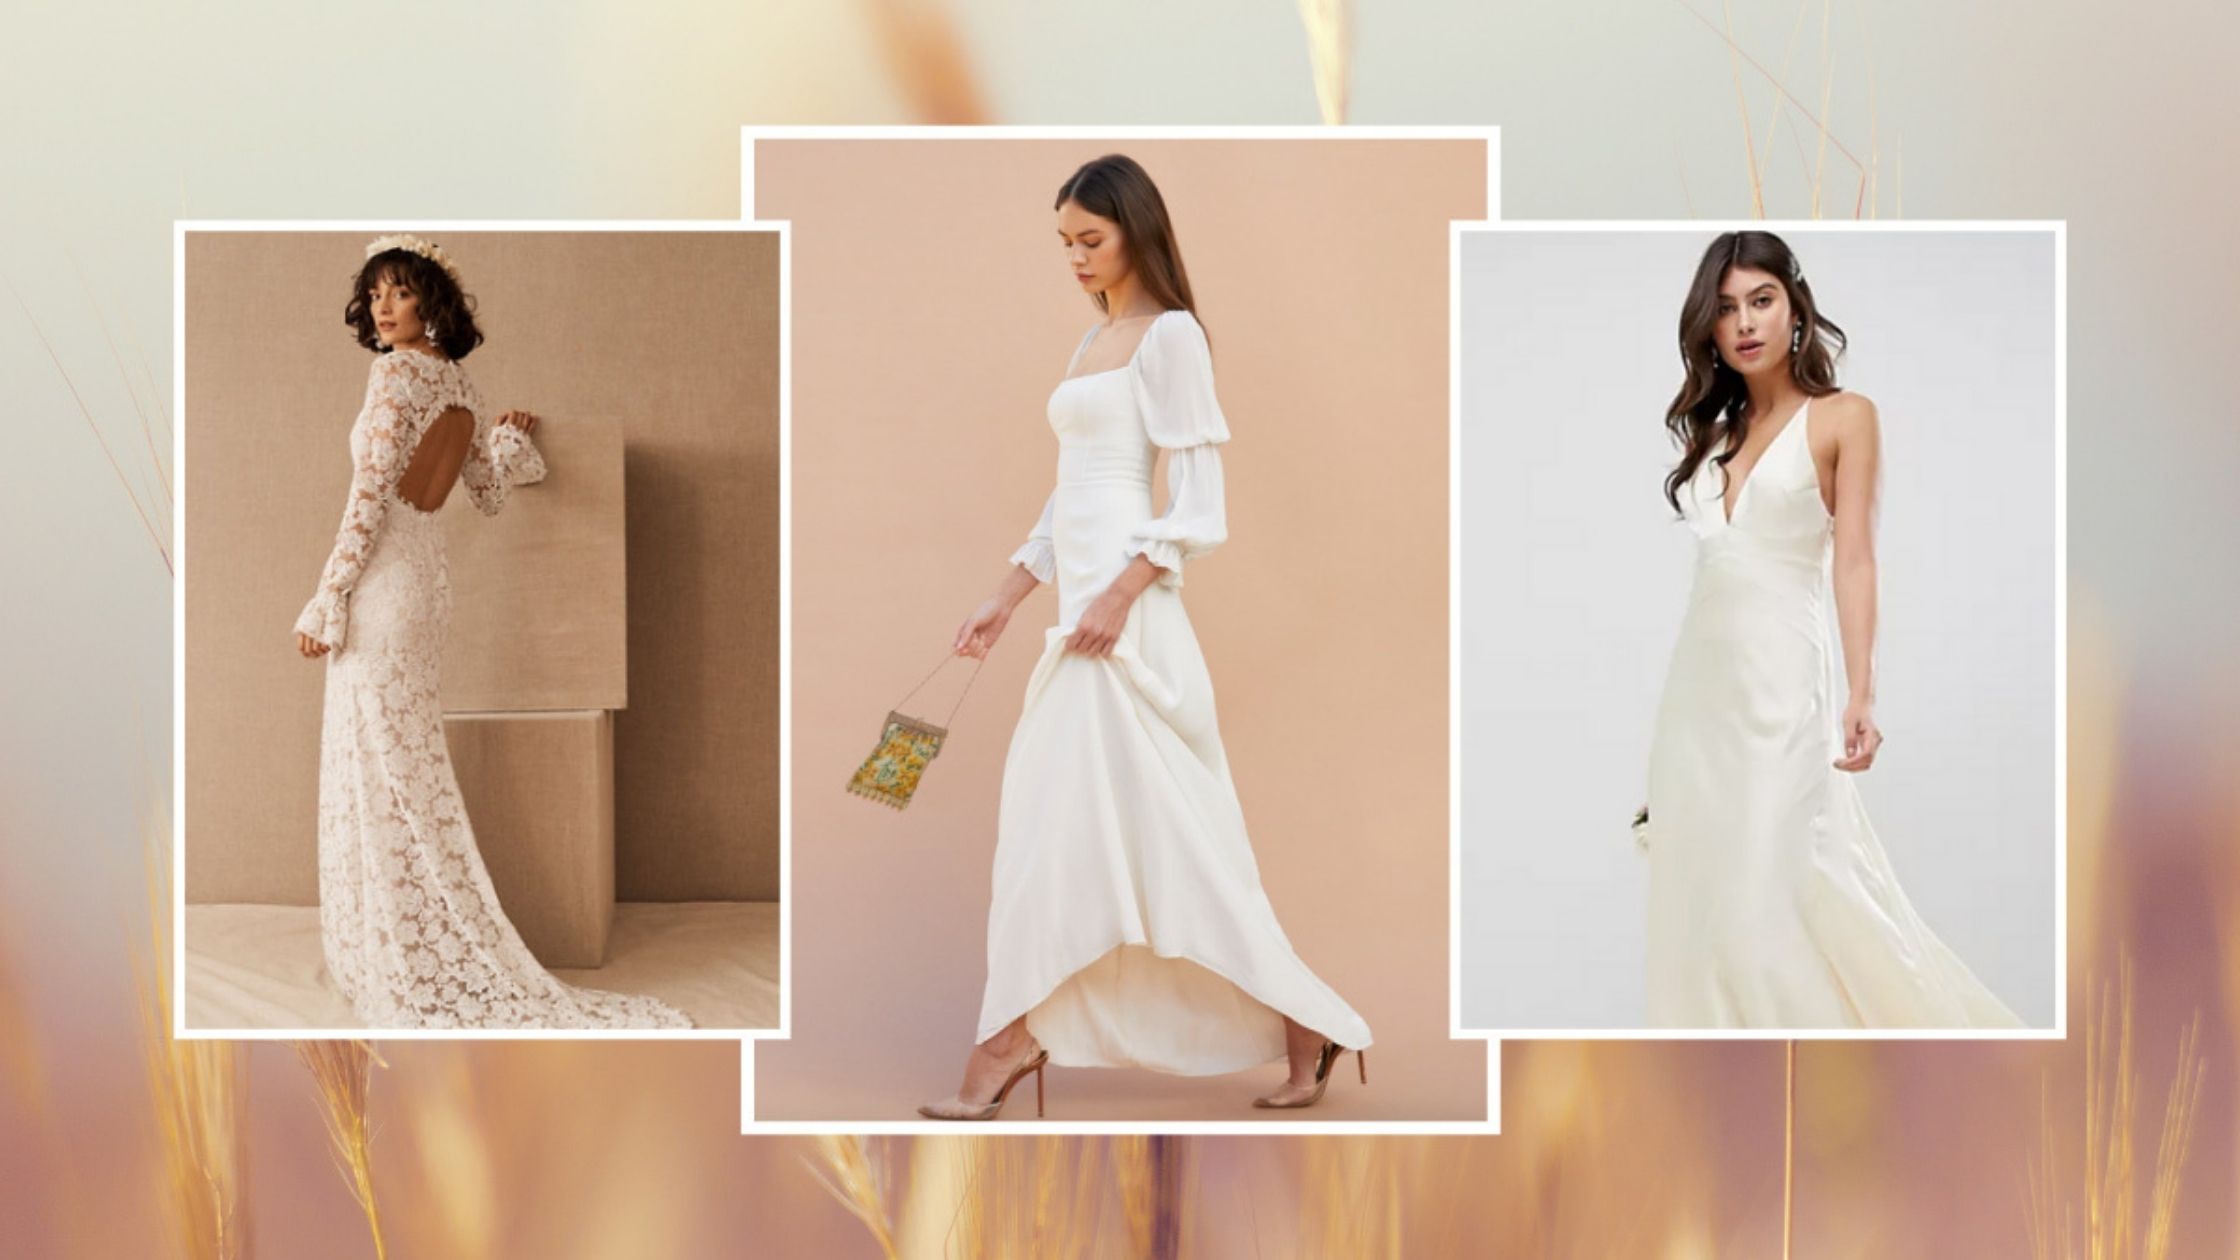 You are currently viewing The Bride’s Guide to Finding the Perfect Wedding Dress